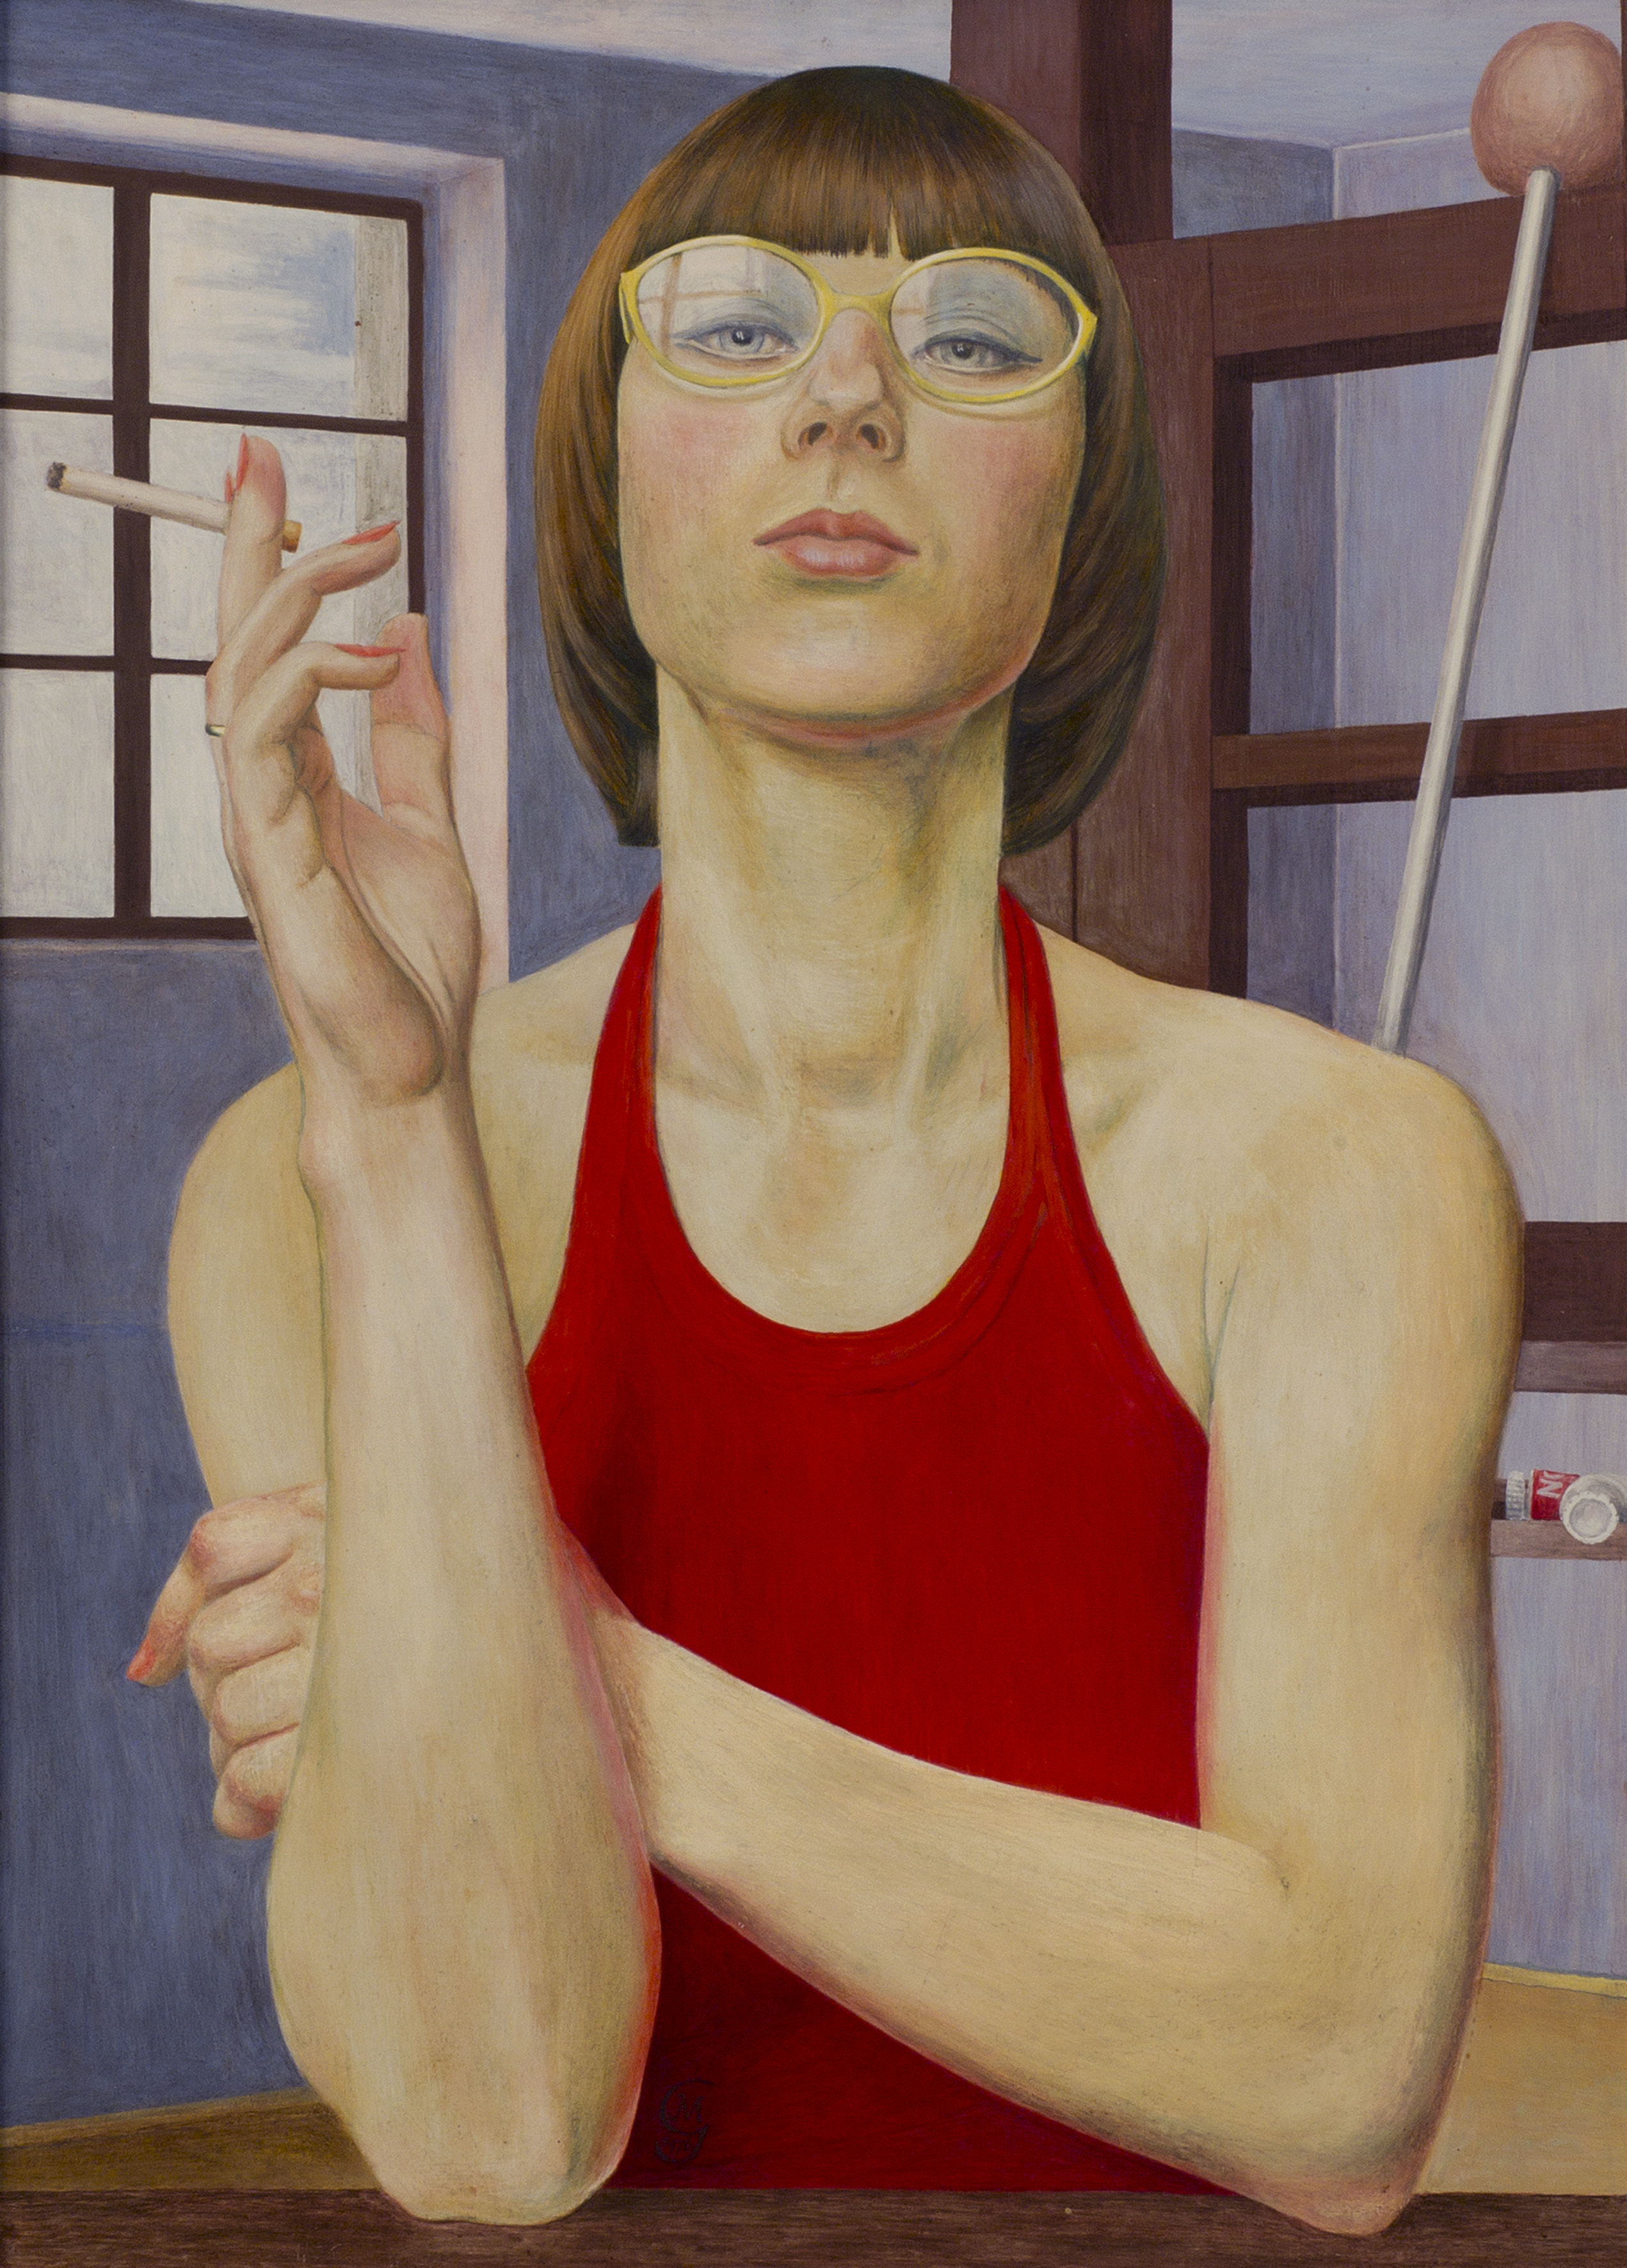 Painting: a woman with chin-length brown hair and glasses looks confidently out of the picture from the front. Her sleeveless top is red. One arm is propped up and she is holding a cigarette in her hand. There is an easel in the background. 